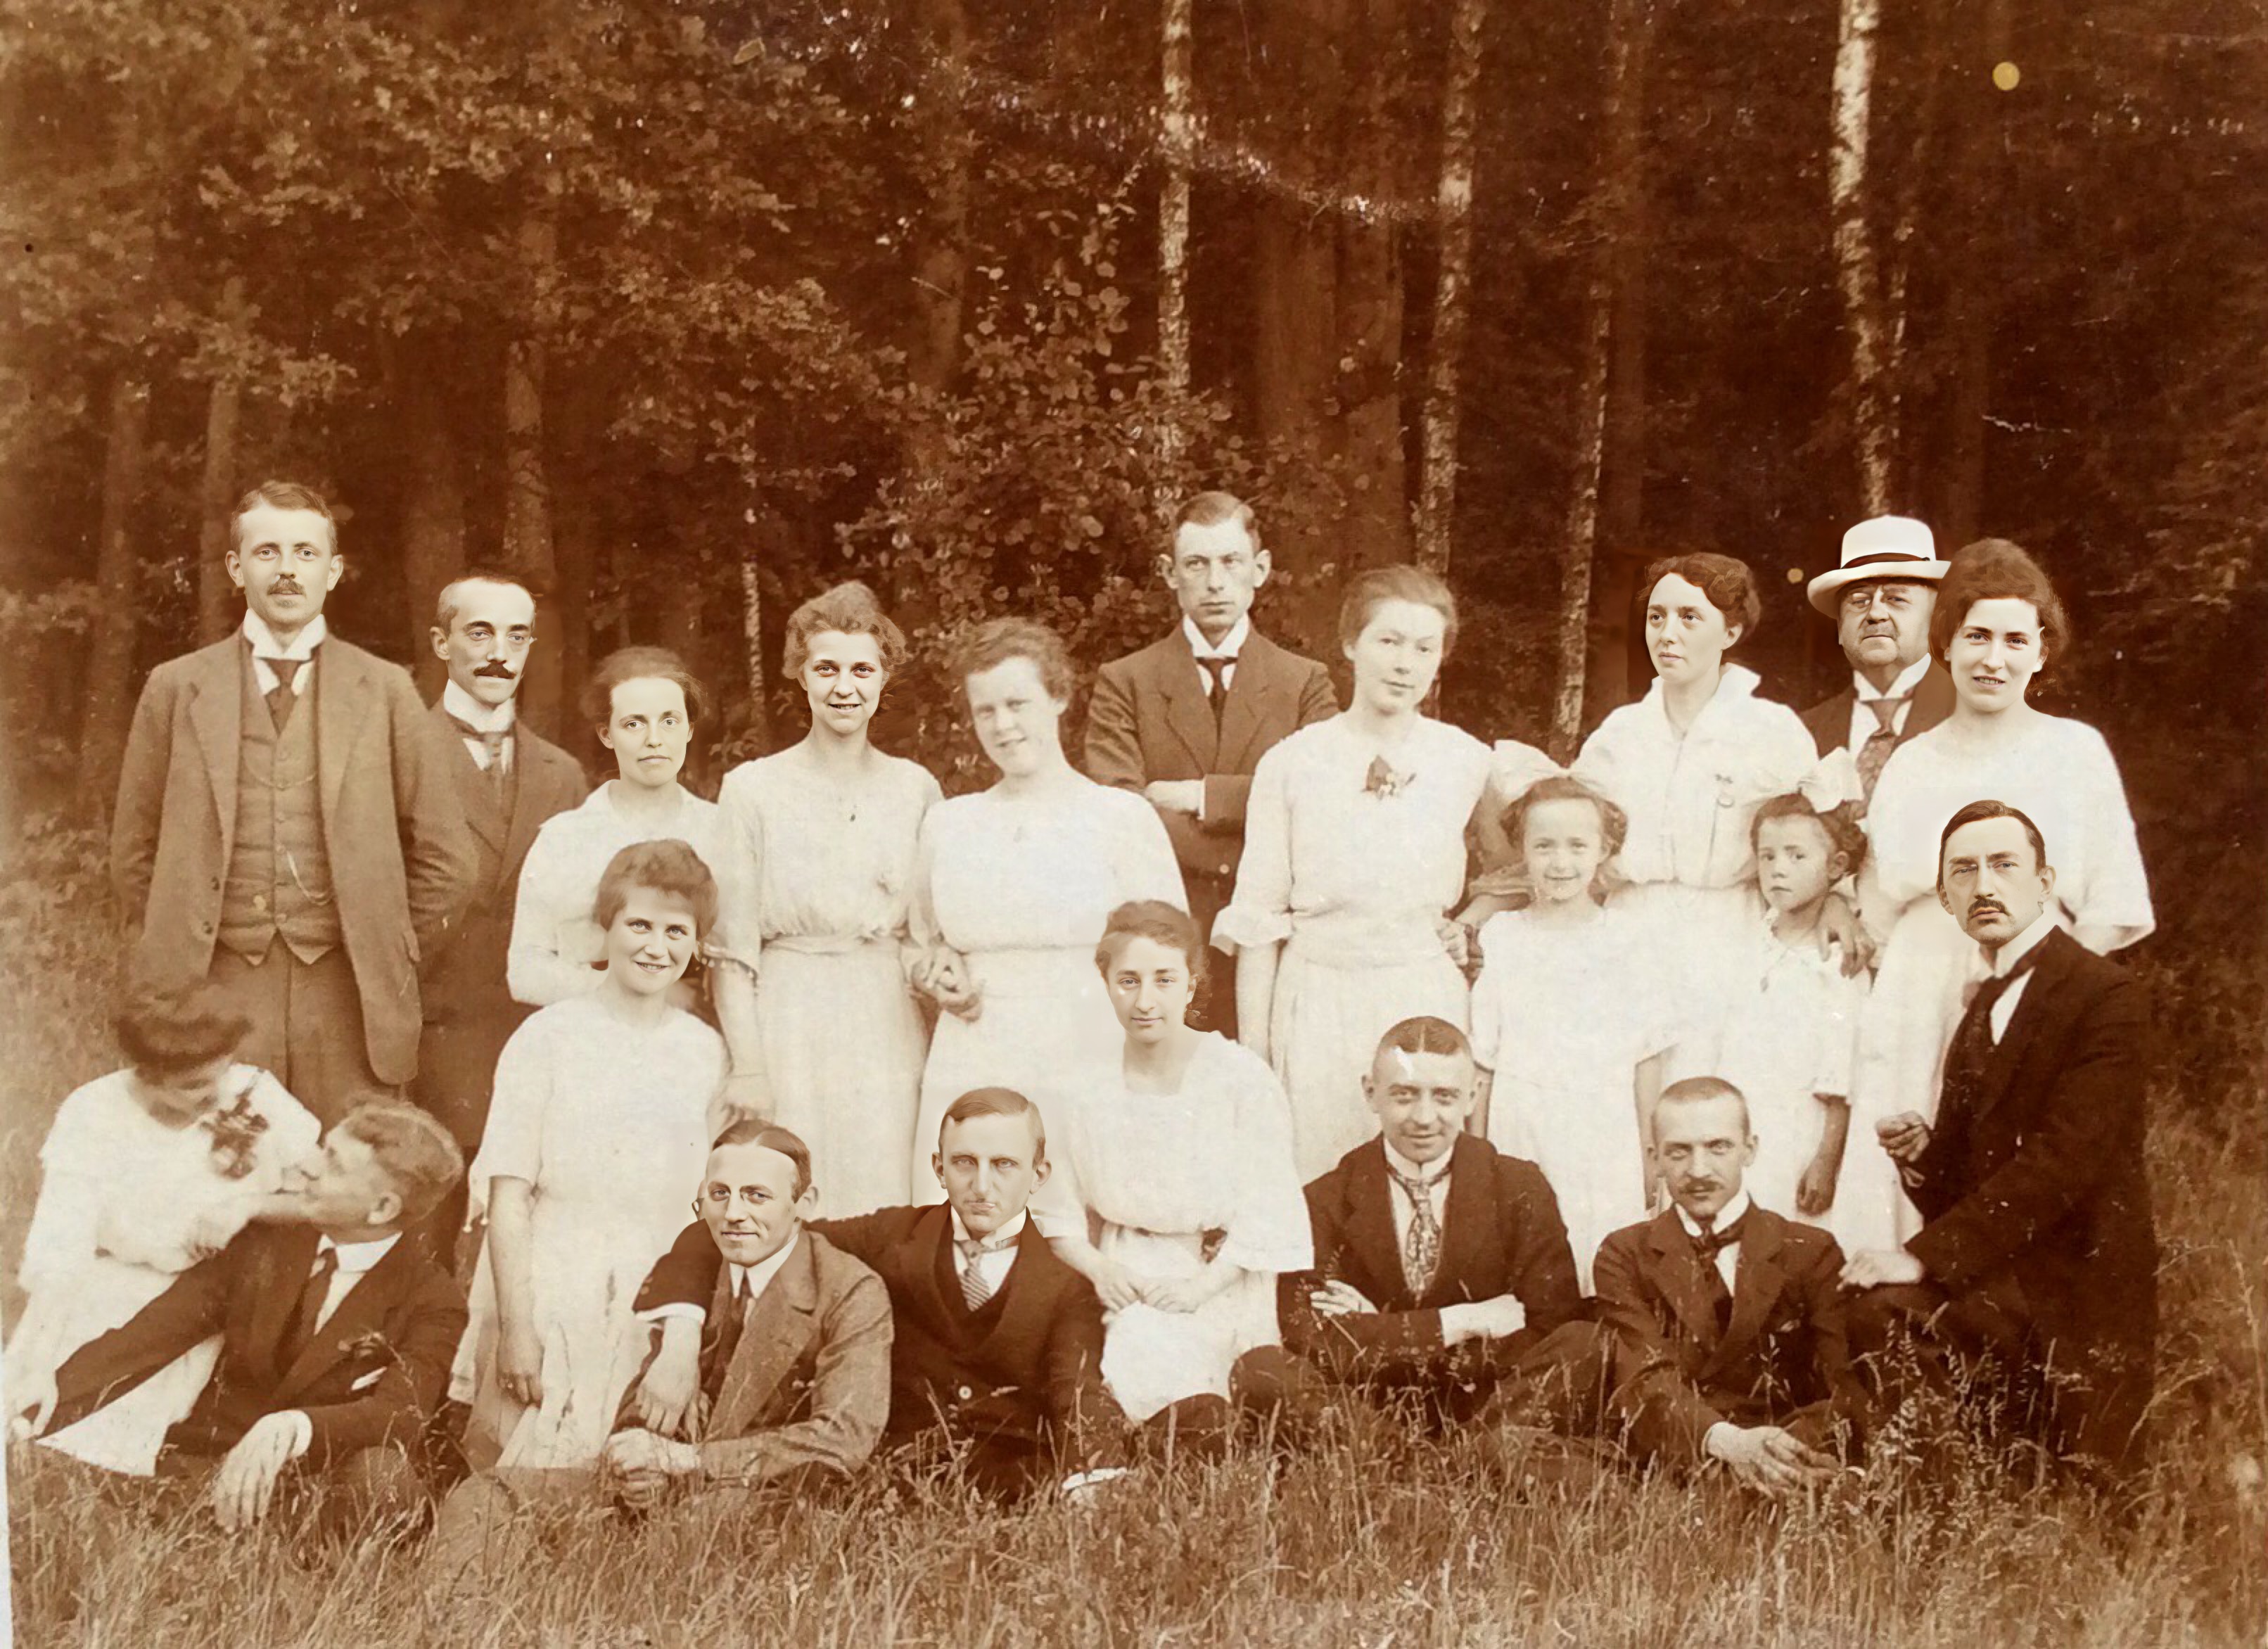 FIRST DAY OF SPRING 1919, GERMANY...MY GRANDPARENTS, BACK ROW ON THE RIGHT AND MY MOM AND HER SISTER IN FRON OF THEM...ALL LADIES IN WHITE, SPRING DAY PICNIC IN THE MOUNTAINS..